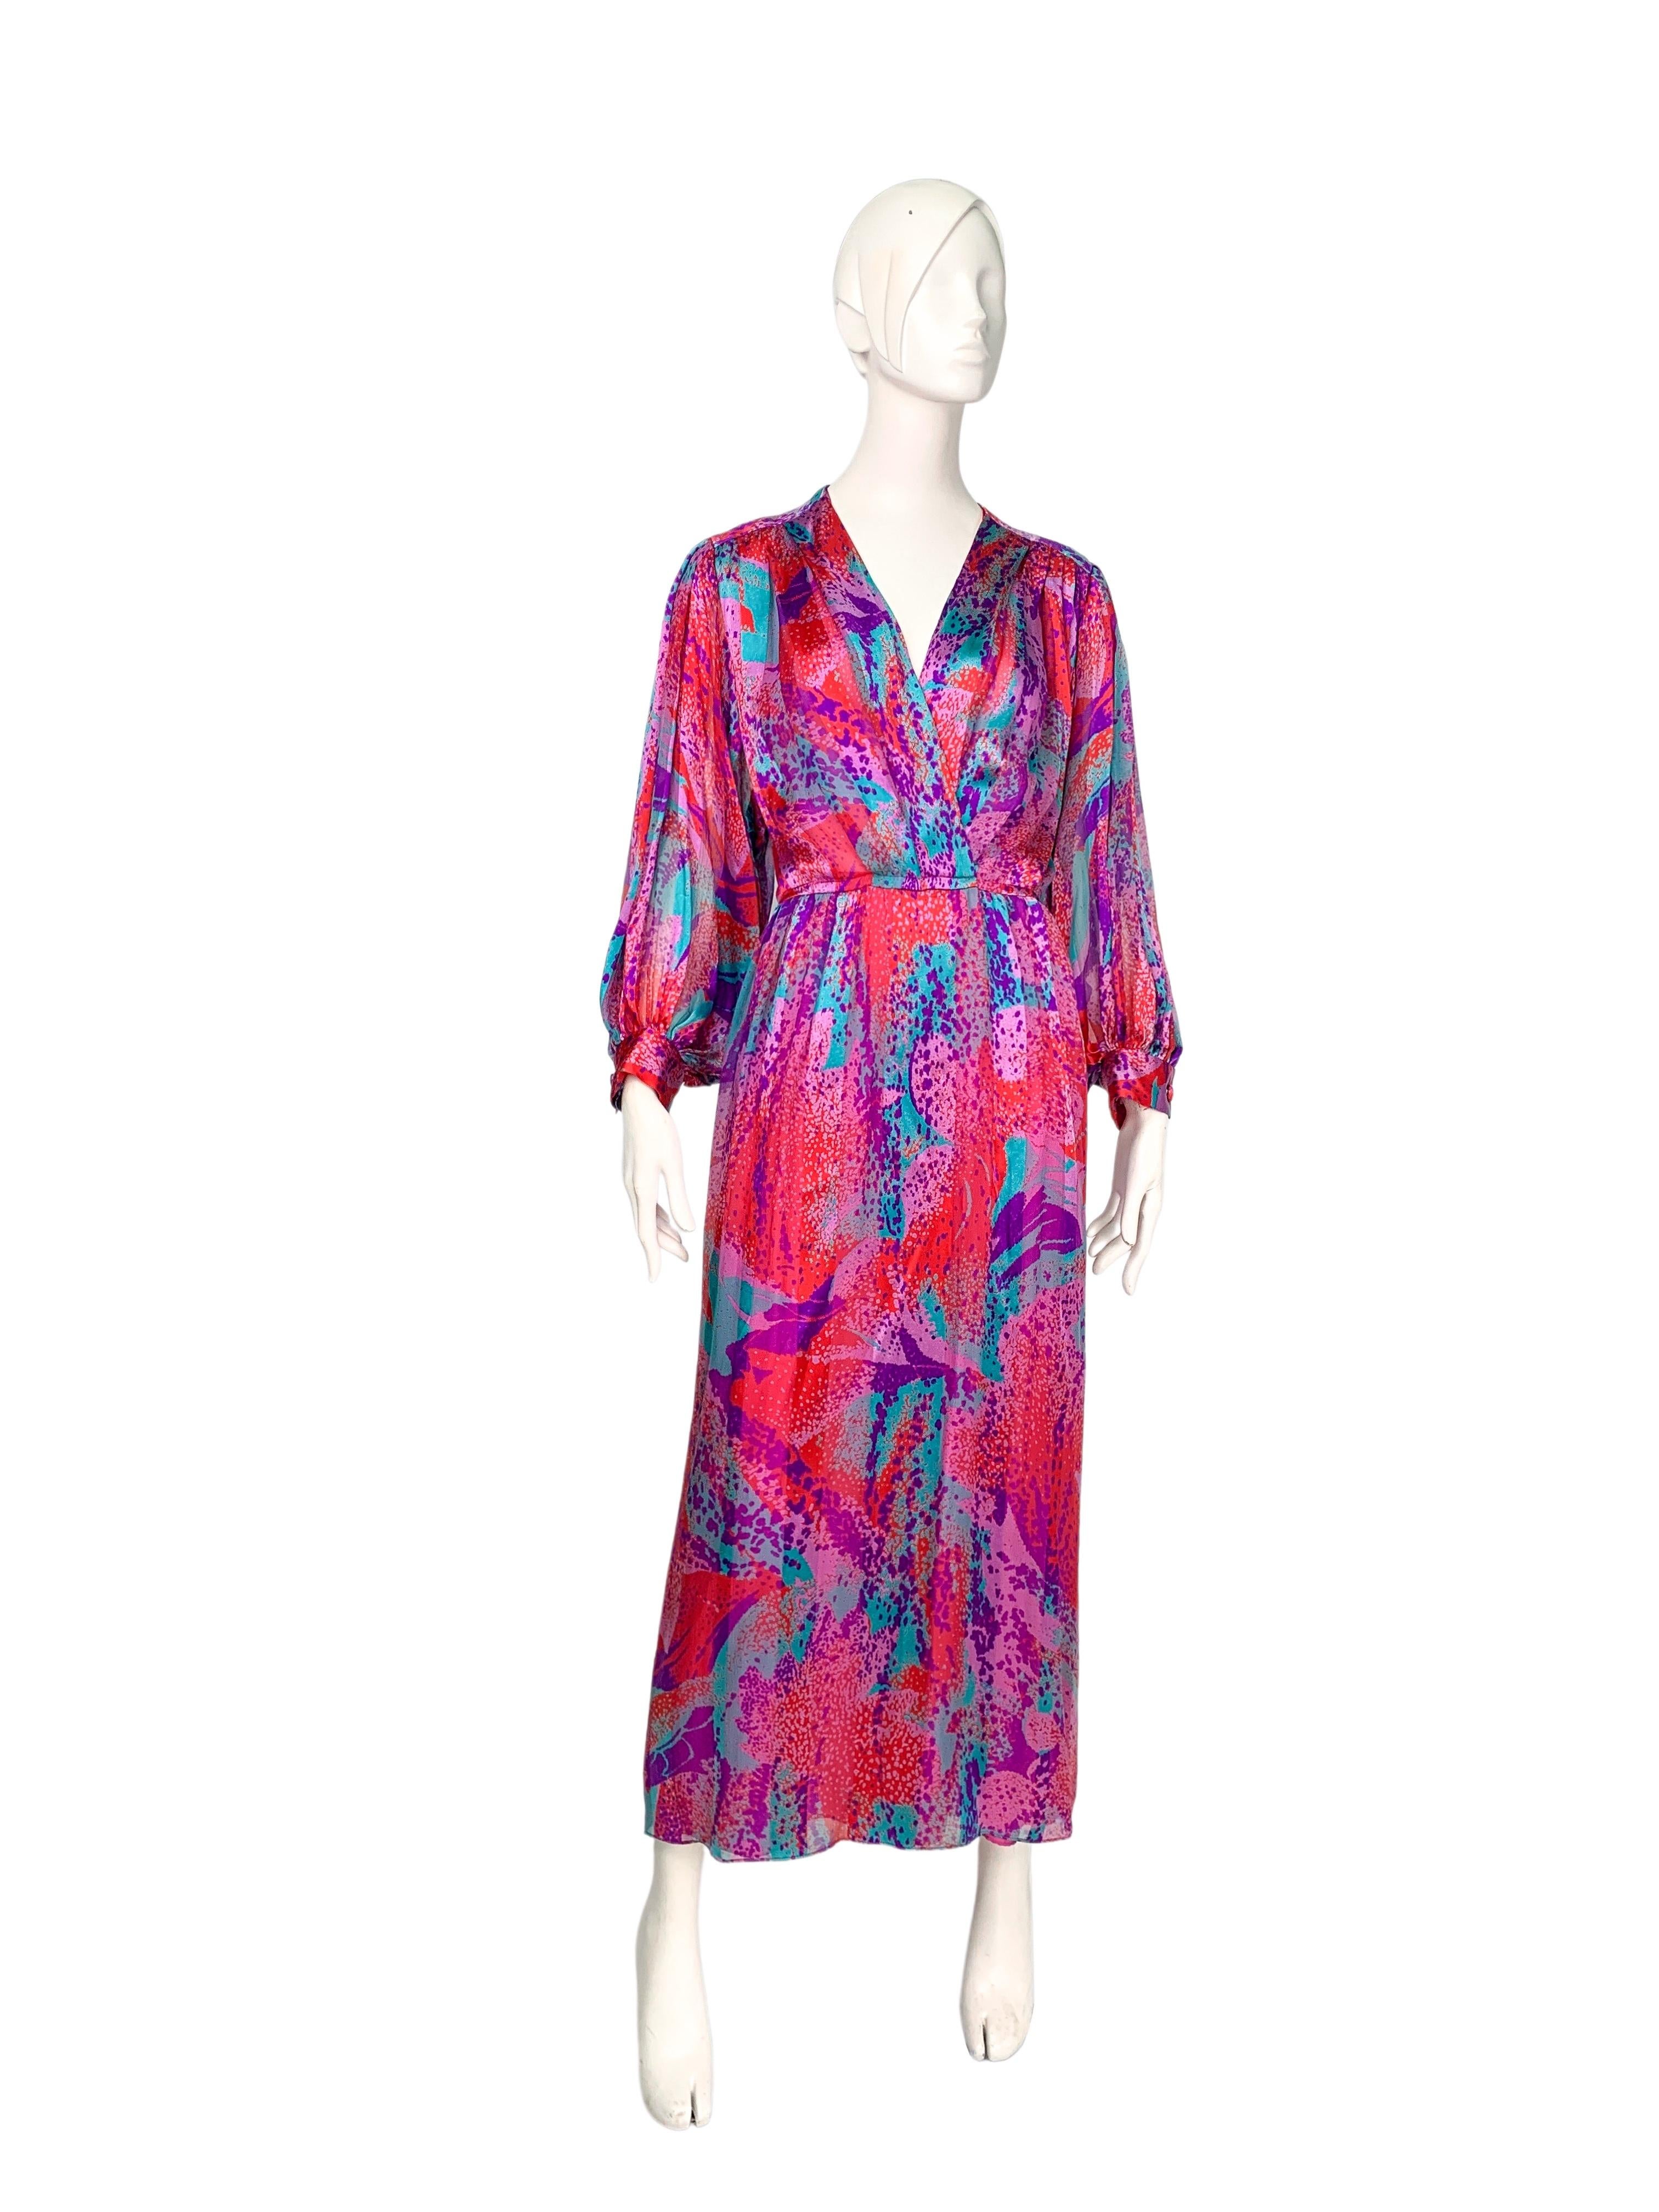 By Akris, a luxury fashion brand from Switzerland, a vintage 1980s silk maxi dress with an all-over abstract print in shades of pink, red, purple, and teal. Features opulently wide kimono-style long sleeves and a wrap-around V-neck bodice.
Excellent